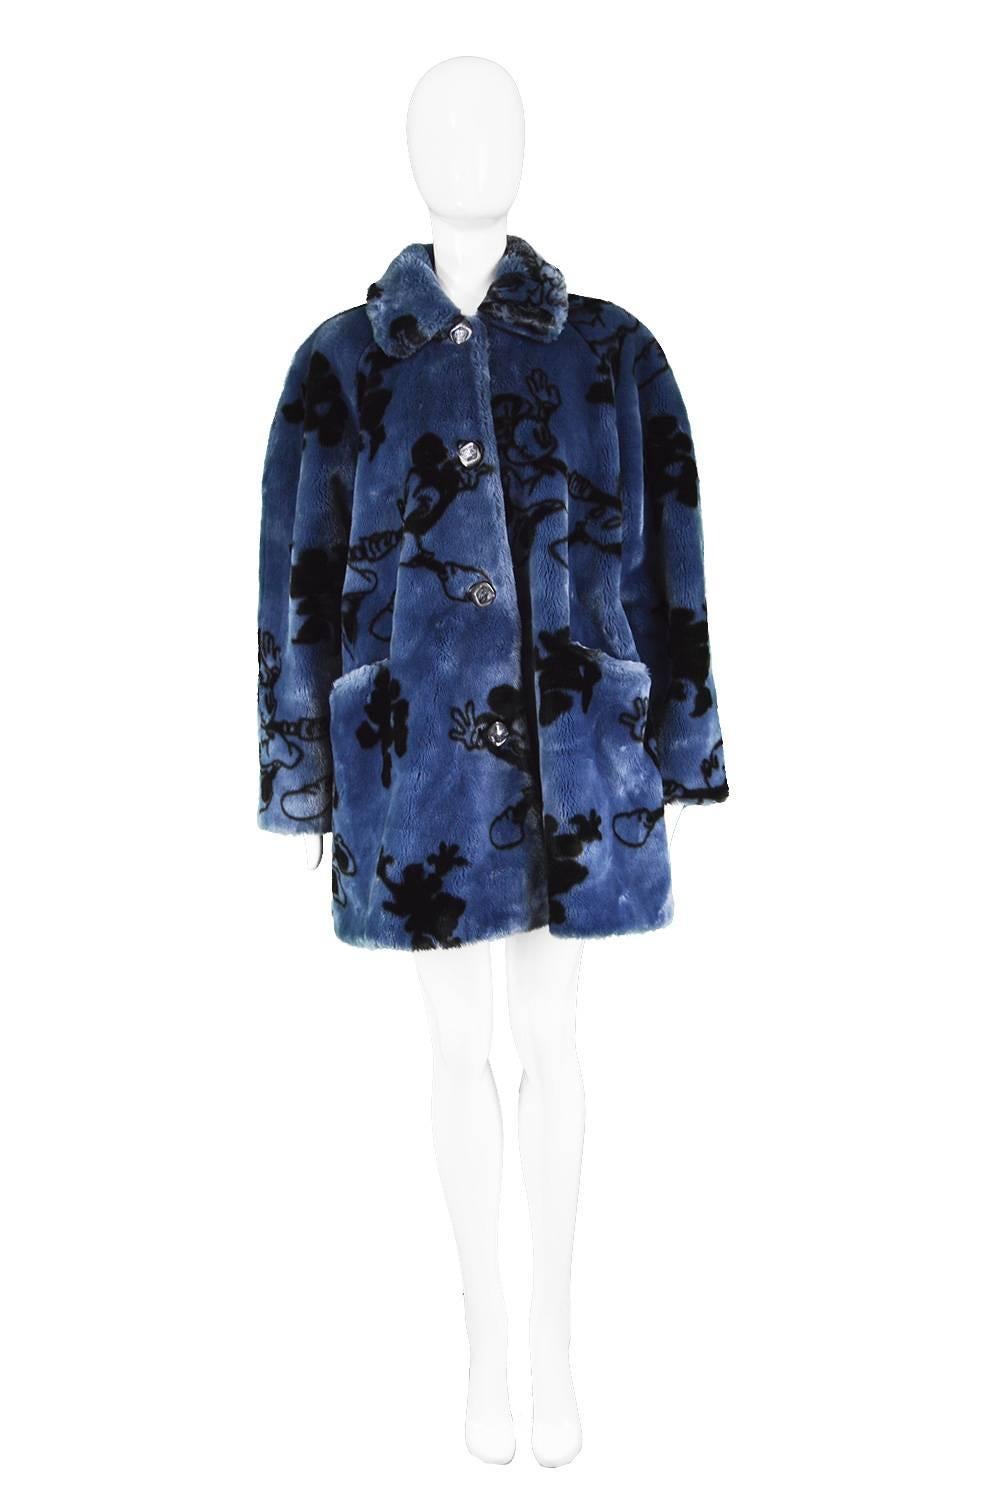 Apparence Paris Mickey & Minnie Mouse Blue Faux Fur Vintage Coat, 1990s

Estimated Size: women's Medium to Large but this gives the intended oversized / swing fit. Please check measurements. 
Bust - 48” / 122cm 
Waist - Free
Length (Shoulder to Hem)